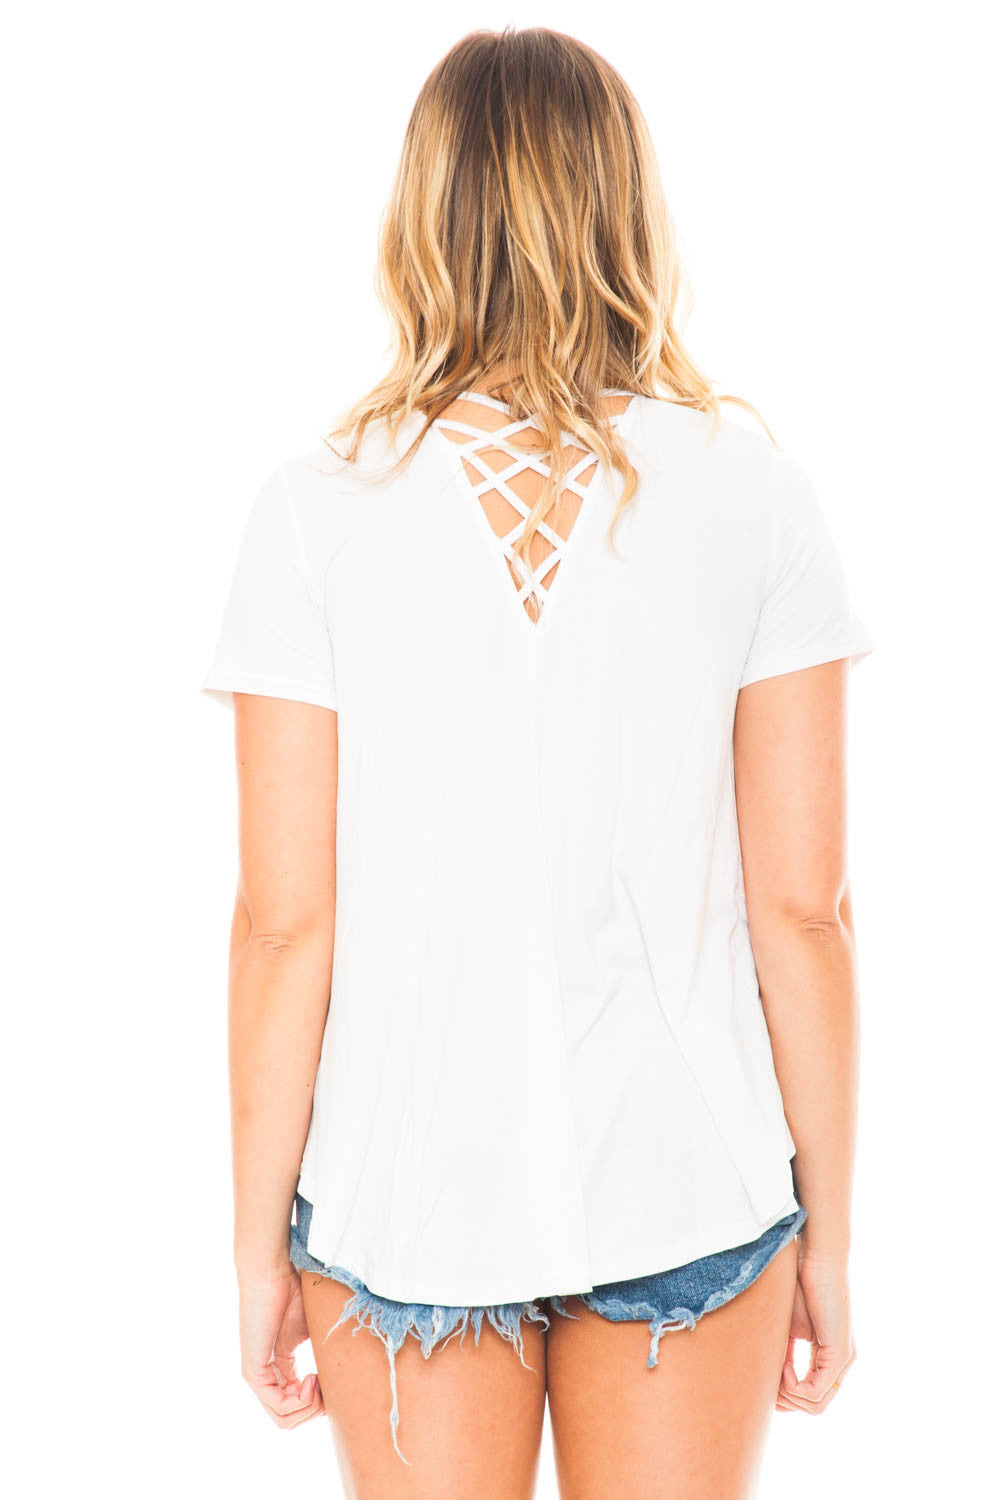 Shirt - Simple V-Neck Tee with Criss Cross Back